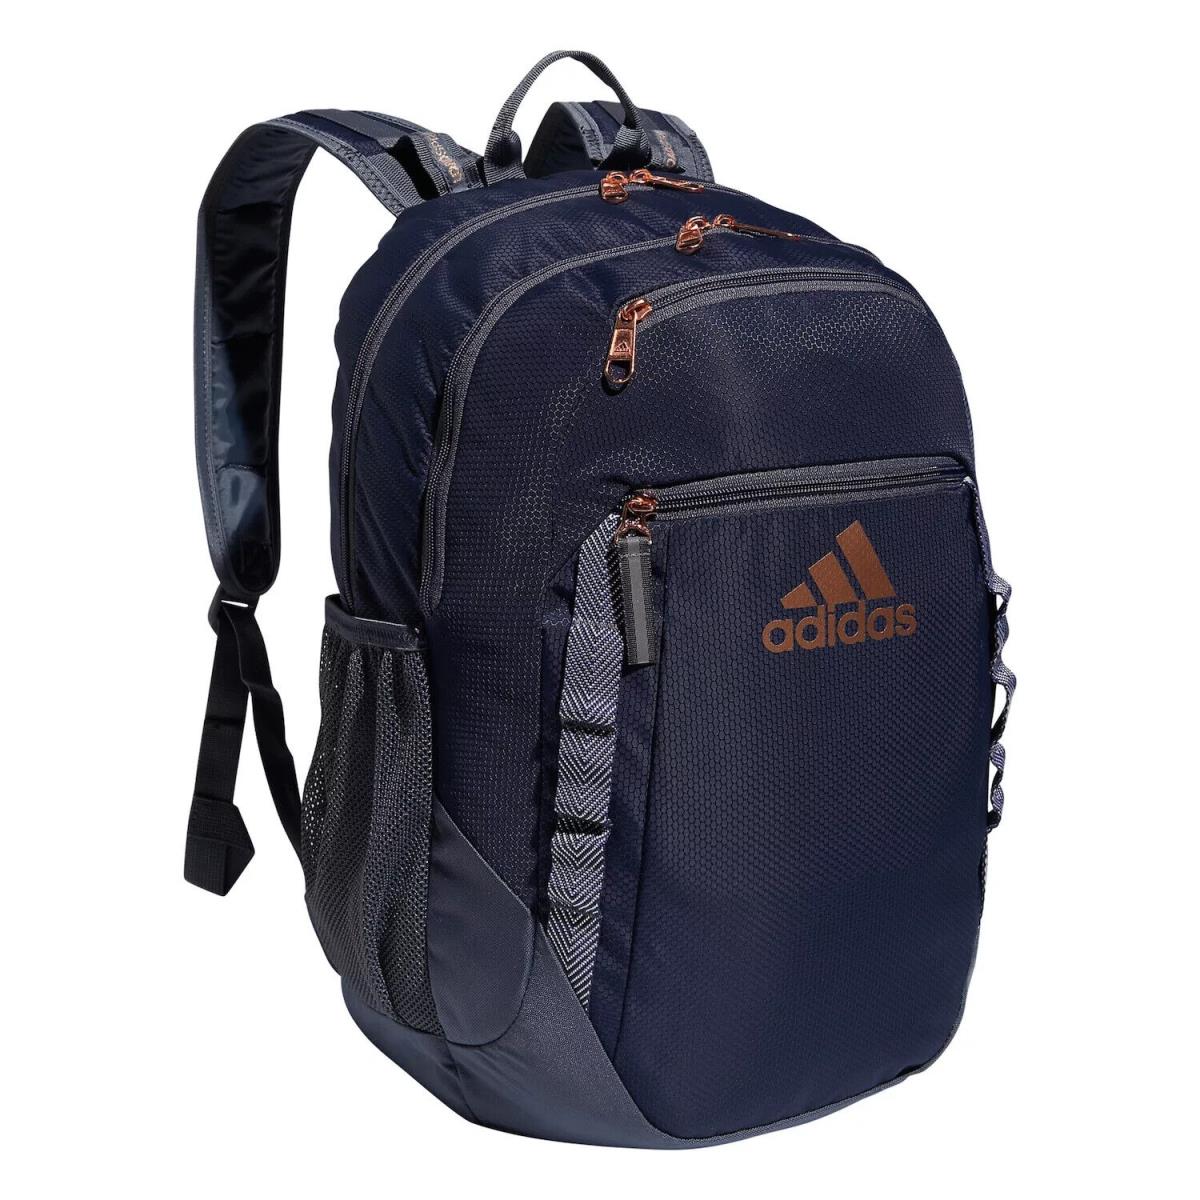 Adidas Excel 6 Backpack with 16 Laptop Sleeve